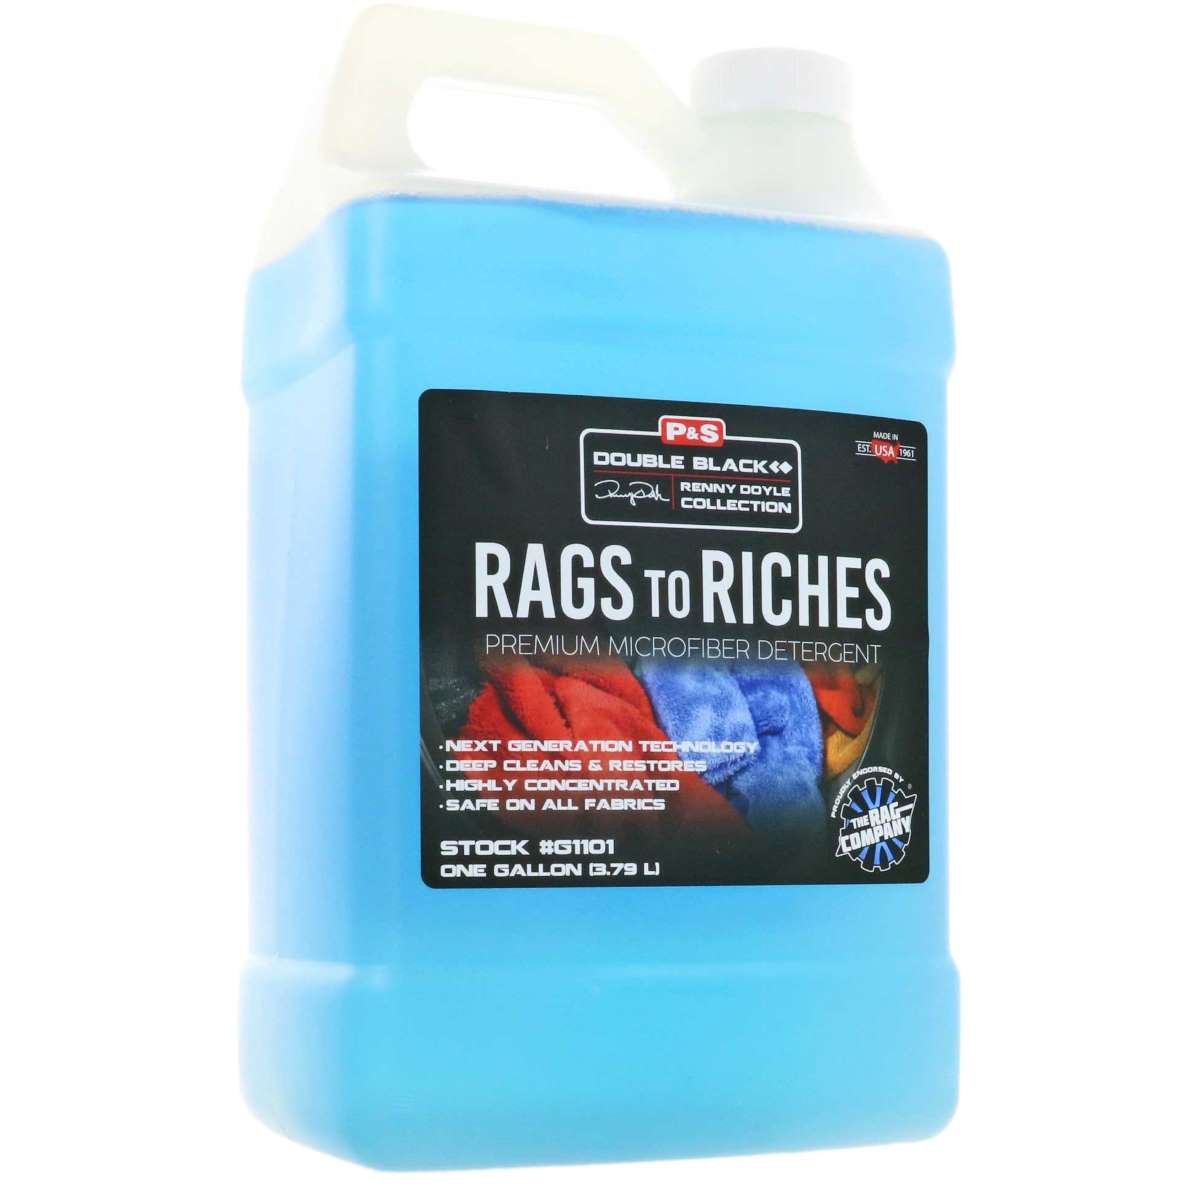 Rags to Riches Microfiber Detergent - 3780ml